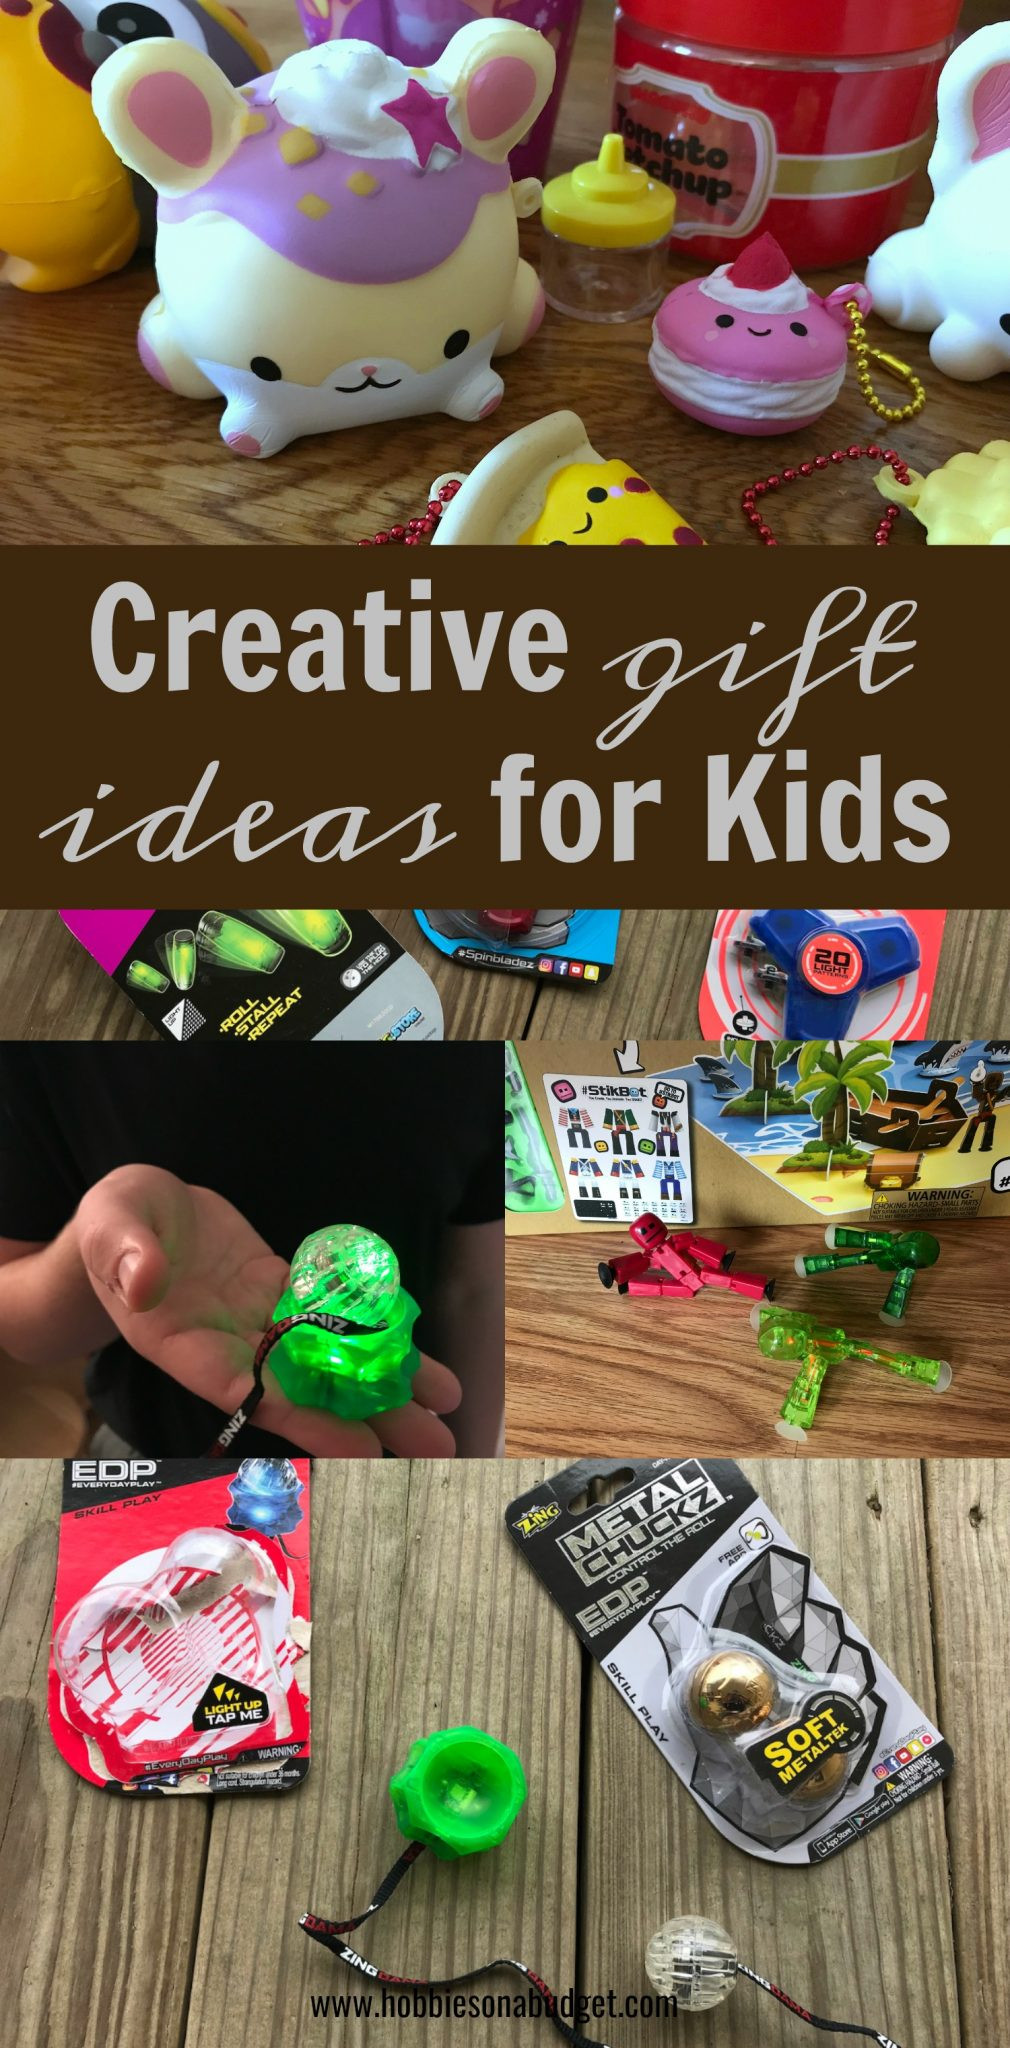 Gifts For Artistic Kids
 Creative Gift Ideas for Kids Hobbies on a Bud